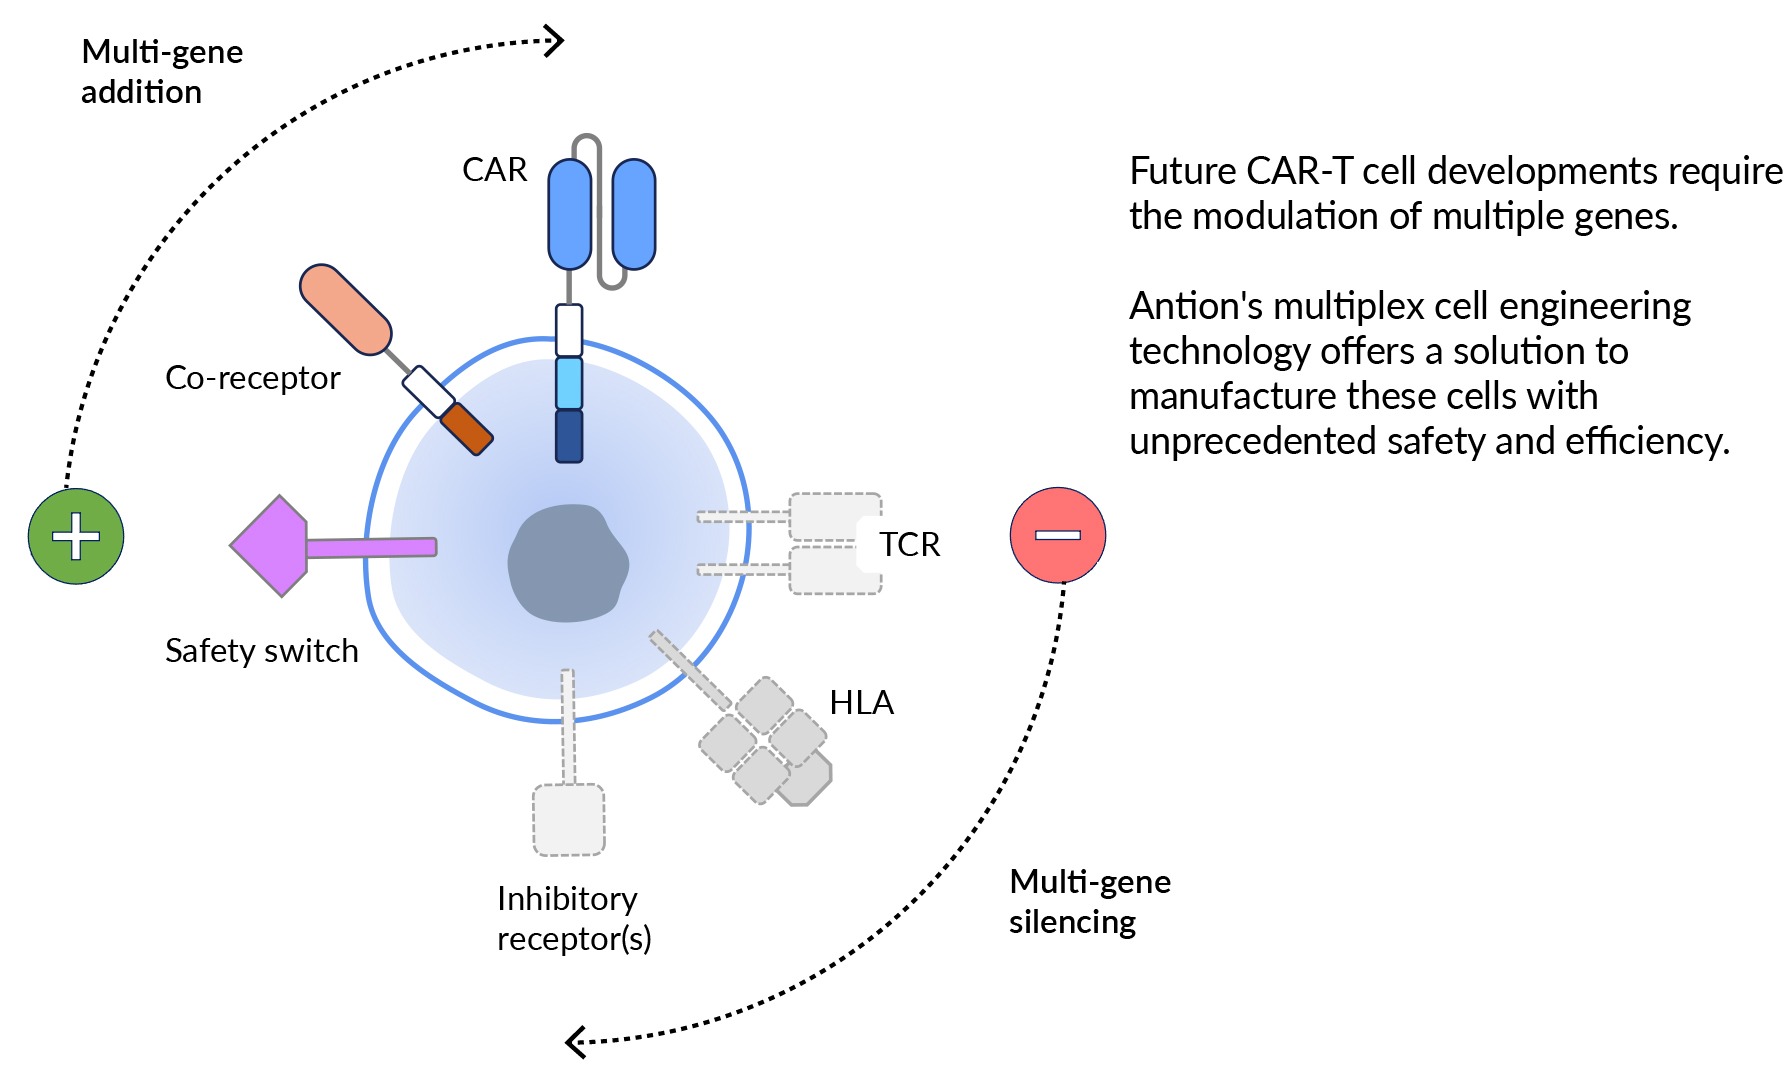 Future CAR-T cell developments require the modulation of multiple genes to achieve prerequisite safety standards and optimize treatment efficacy. The challenge of cell and gene engineering strategies is thus to accommodate contrasting modalities—on the one hand, multi-gene addition to over-express molecules, and on the other to silence the expression of multiple genes (subtractive effect). CAR: chimeric antigen receptor; TCR: T cell receptor; HLA: human leukocyte antigen.